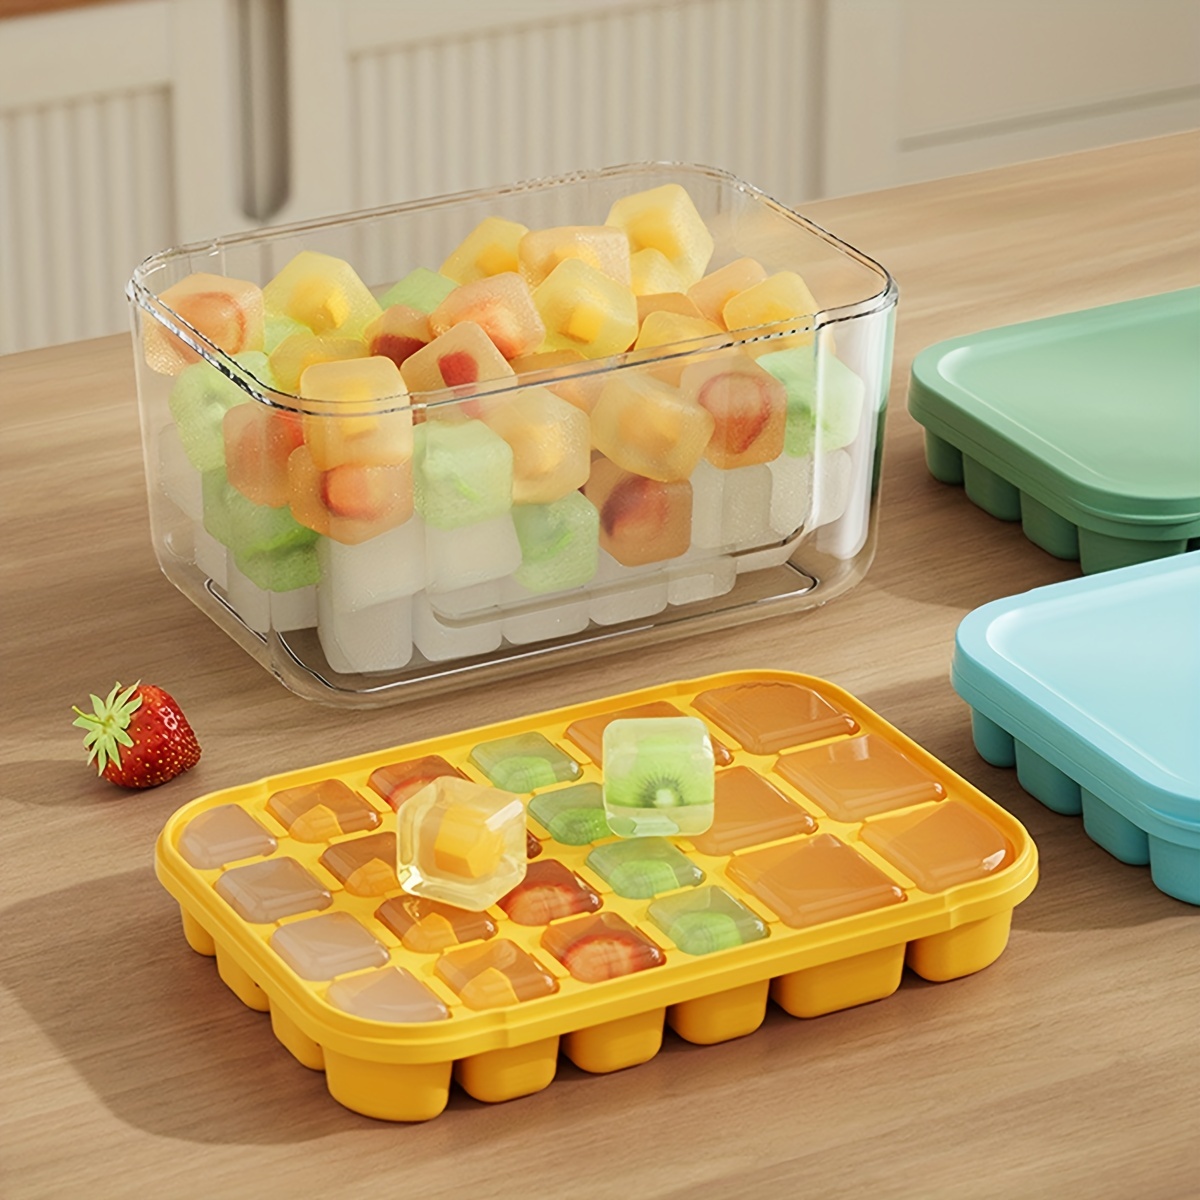 Ice Cube Trays With Lids, Silicone Ice Cube Molds, Flexible 24